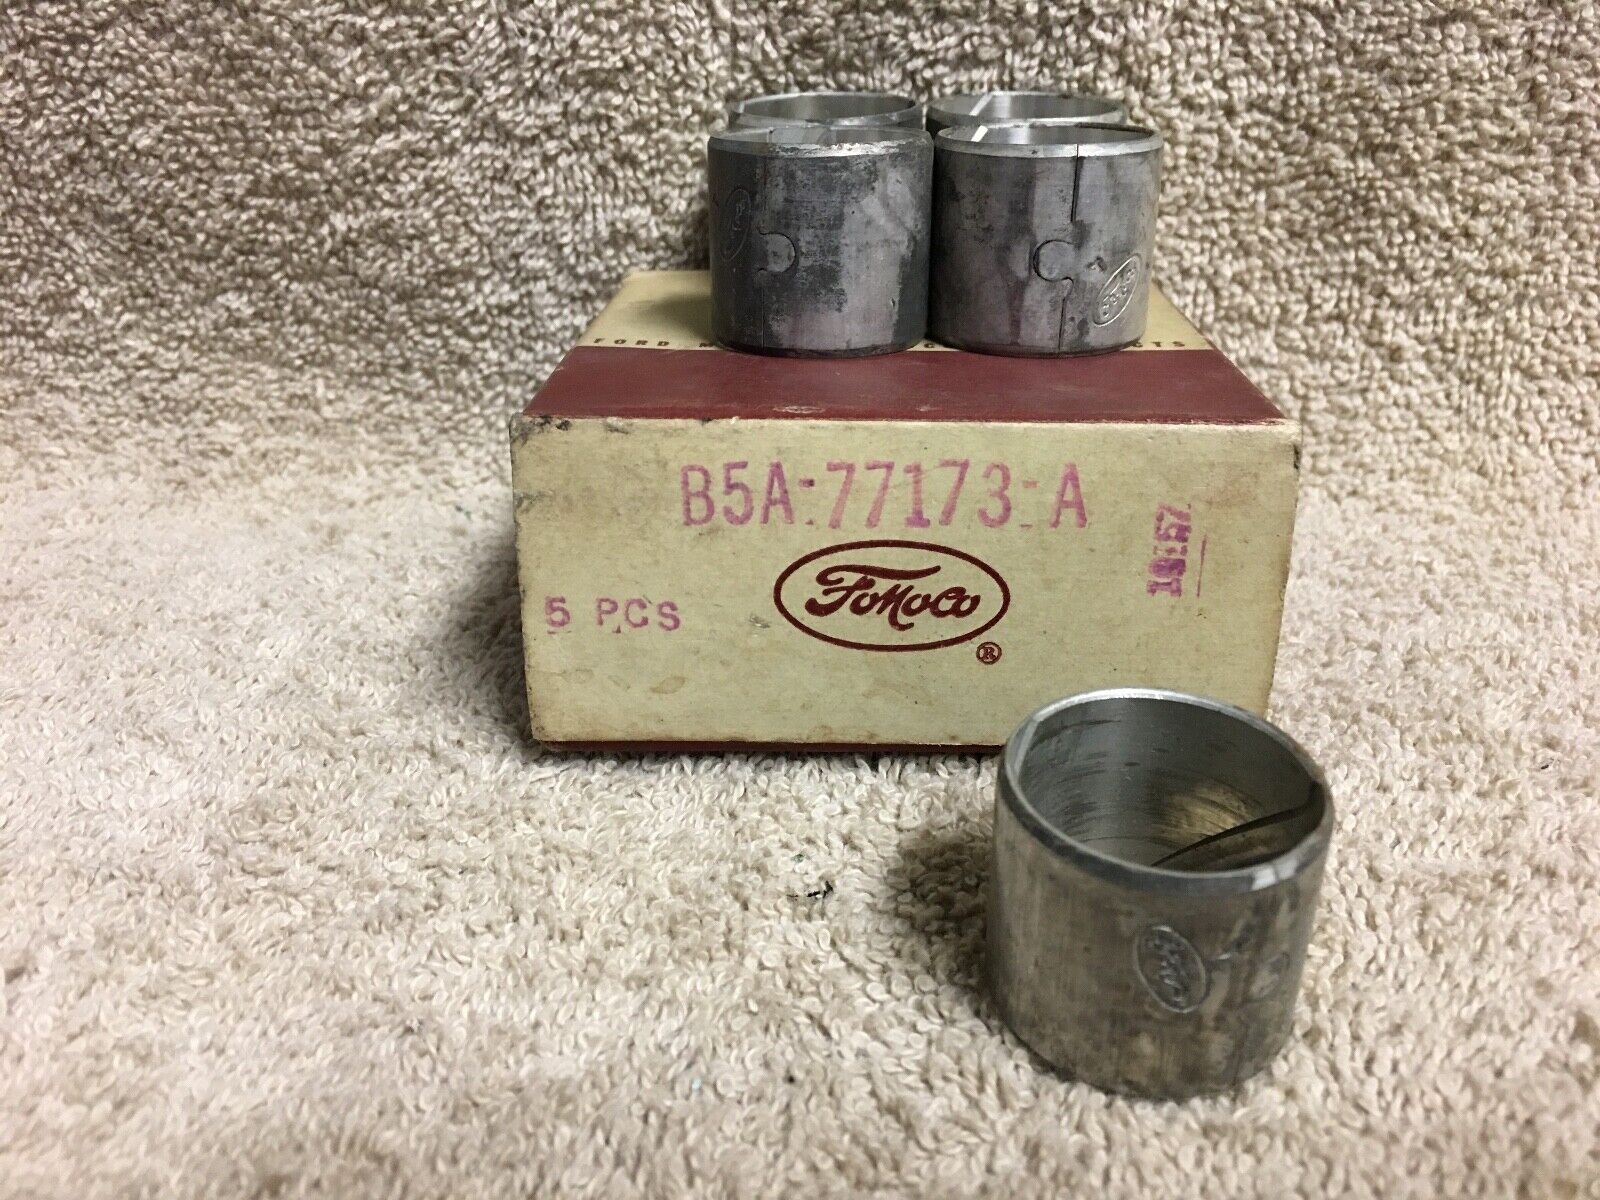 NOS FORD B5A-77173-A 1956-1961 REAR BRAKE DRUM SUPPORT BUSHING (5)